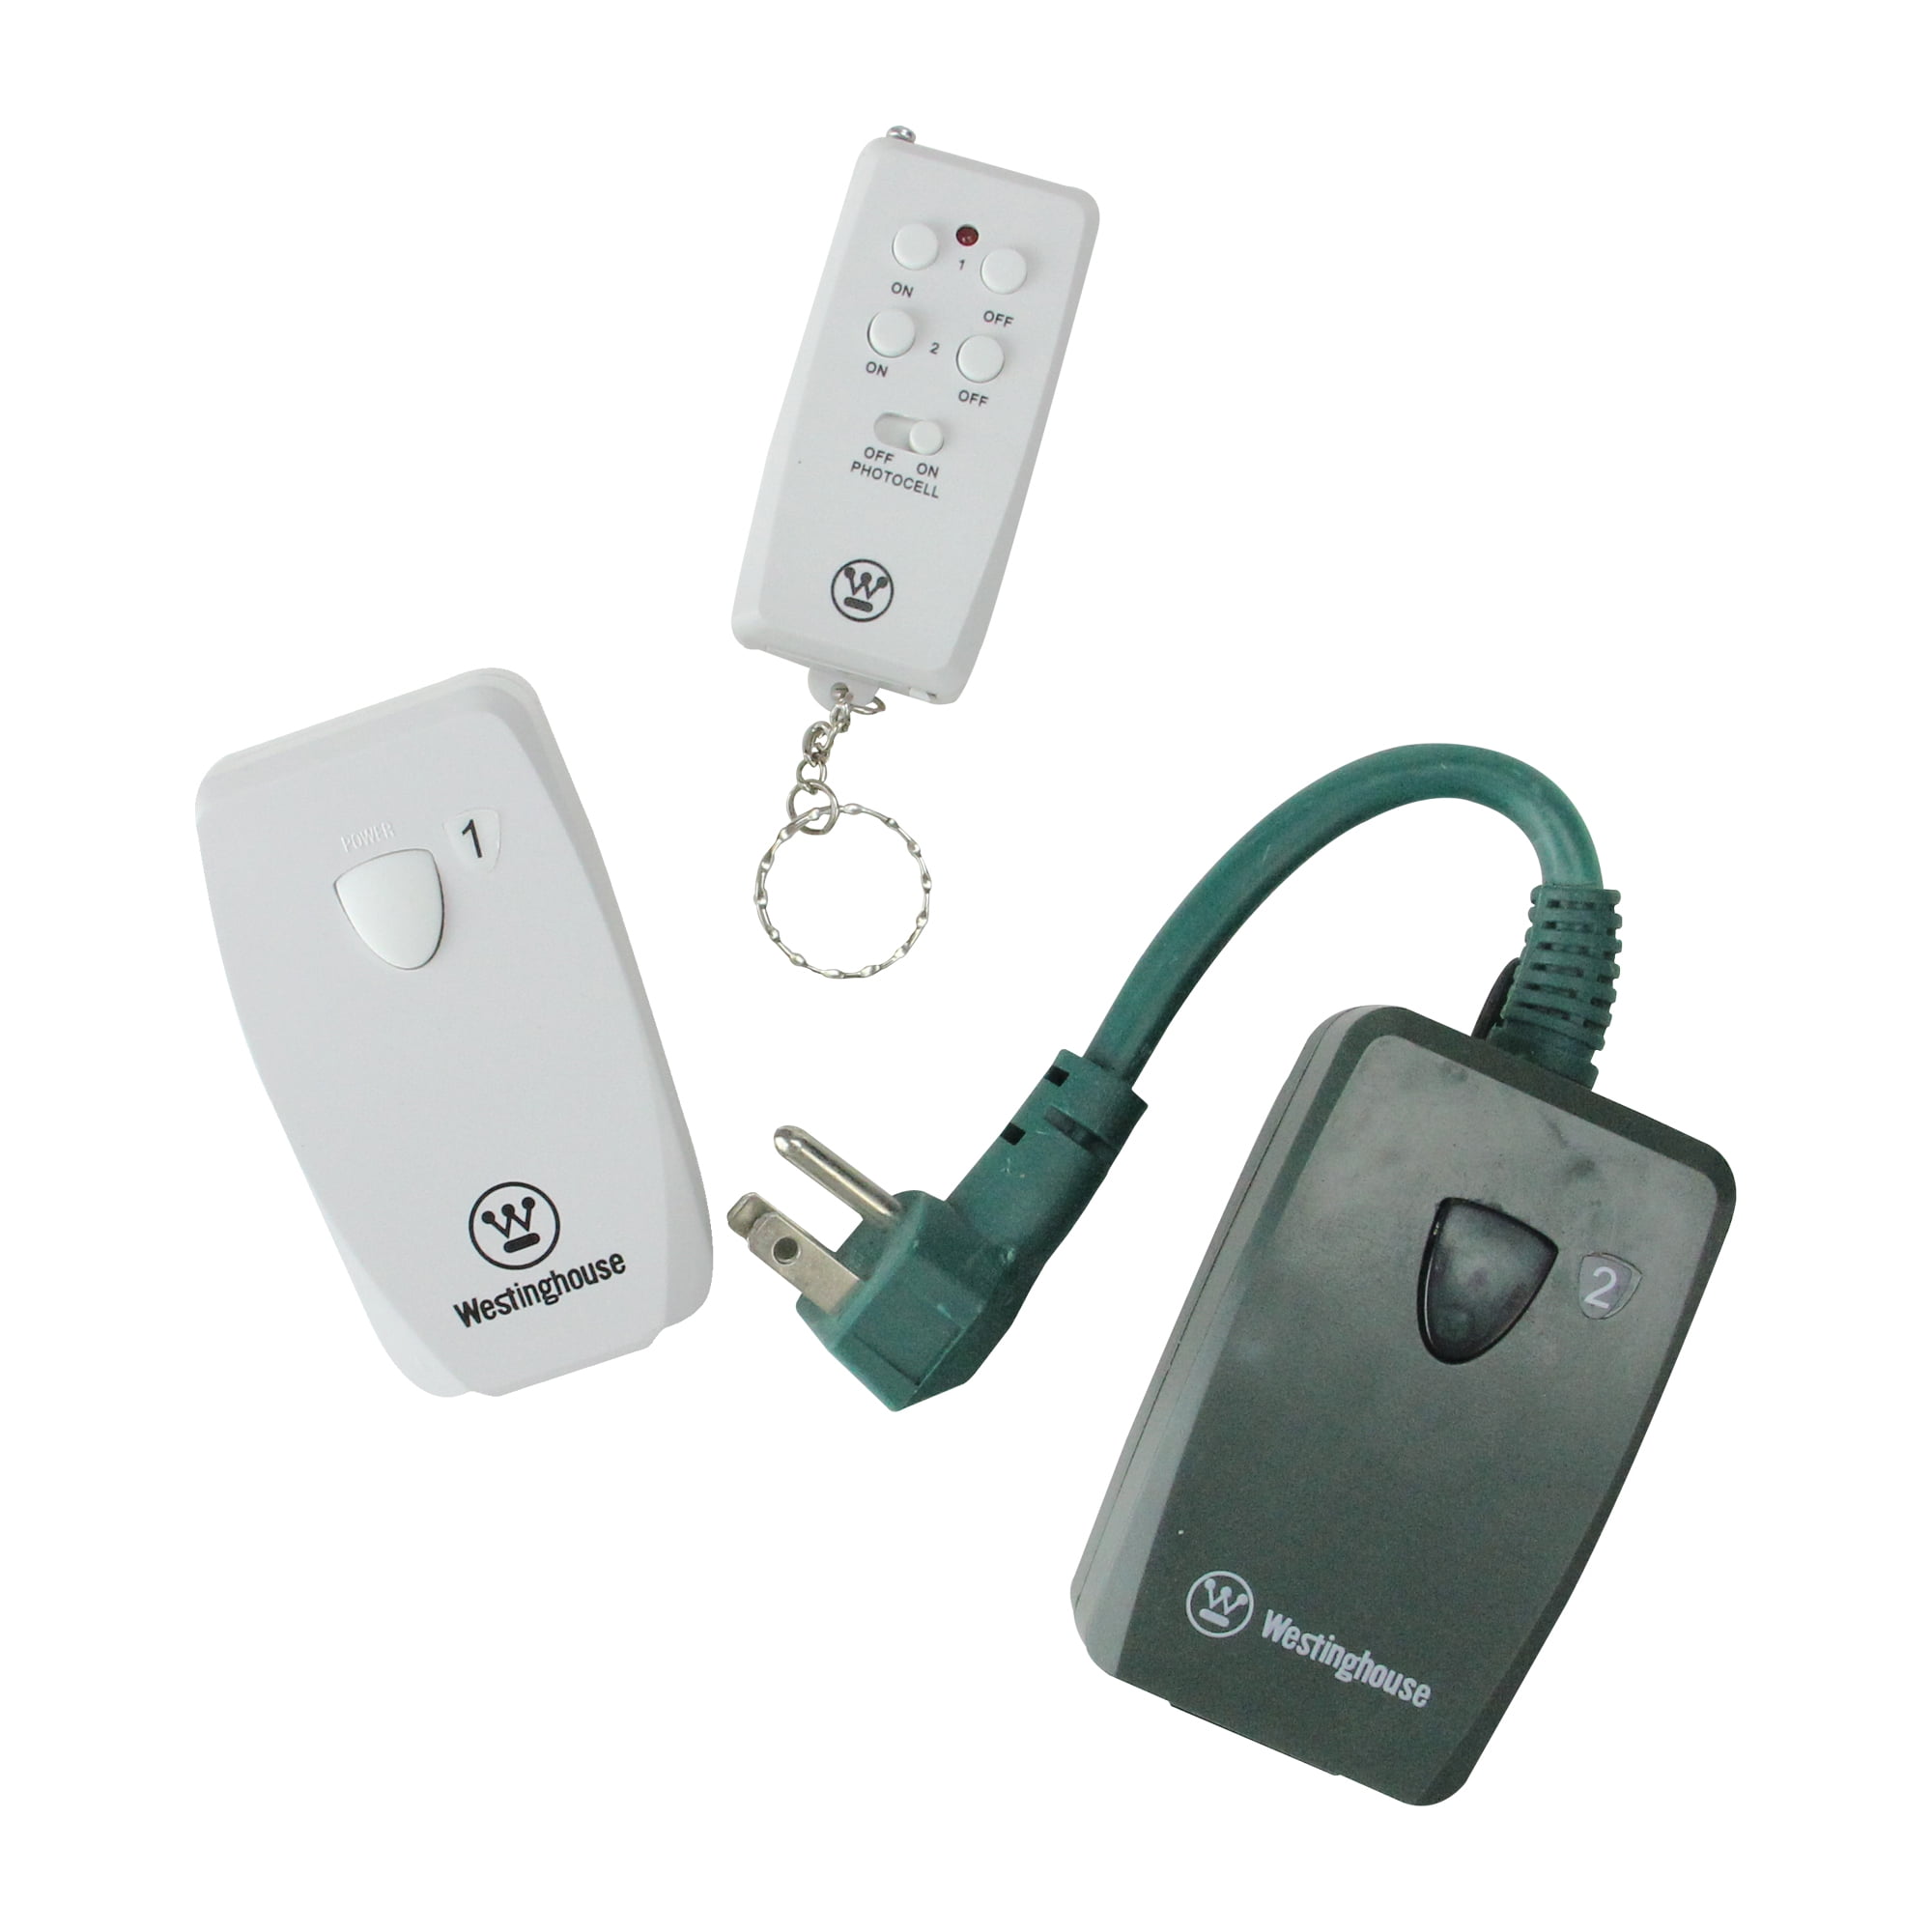 Westinghouse 28067 Indoor Outlet Remote Control System, White